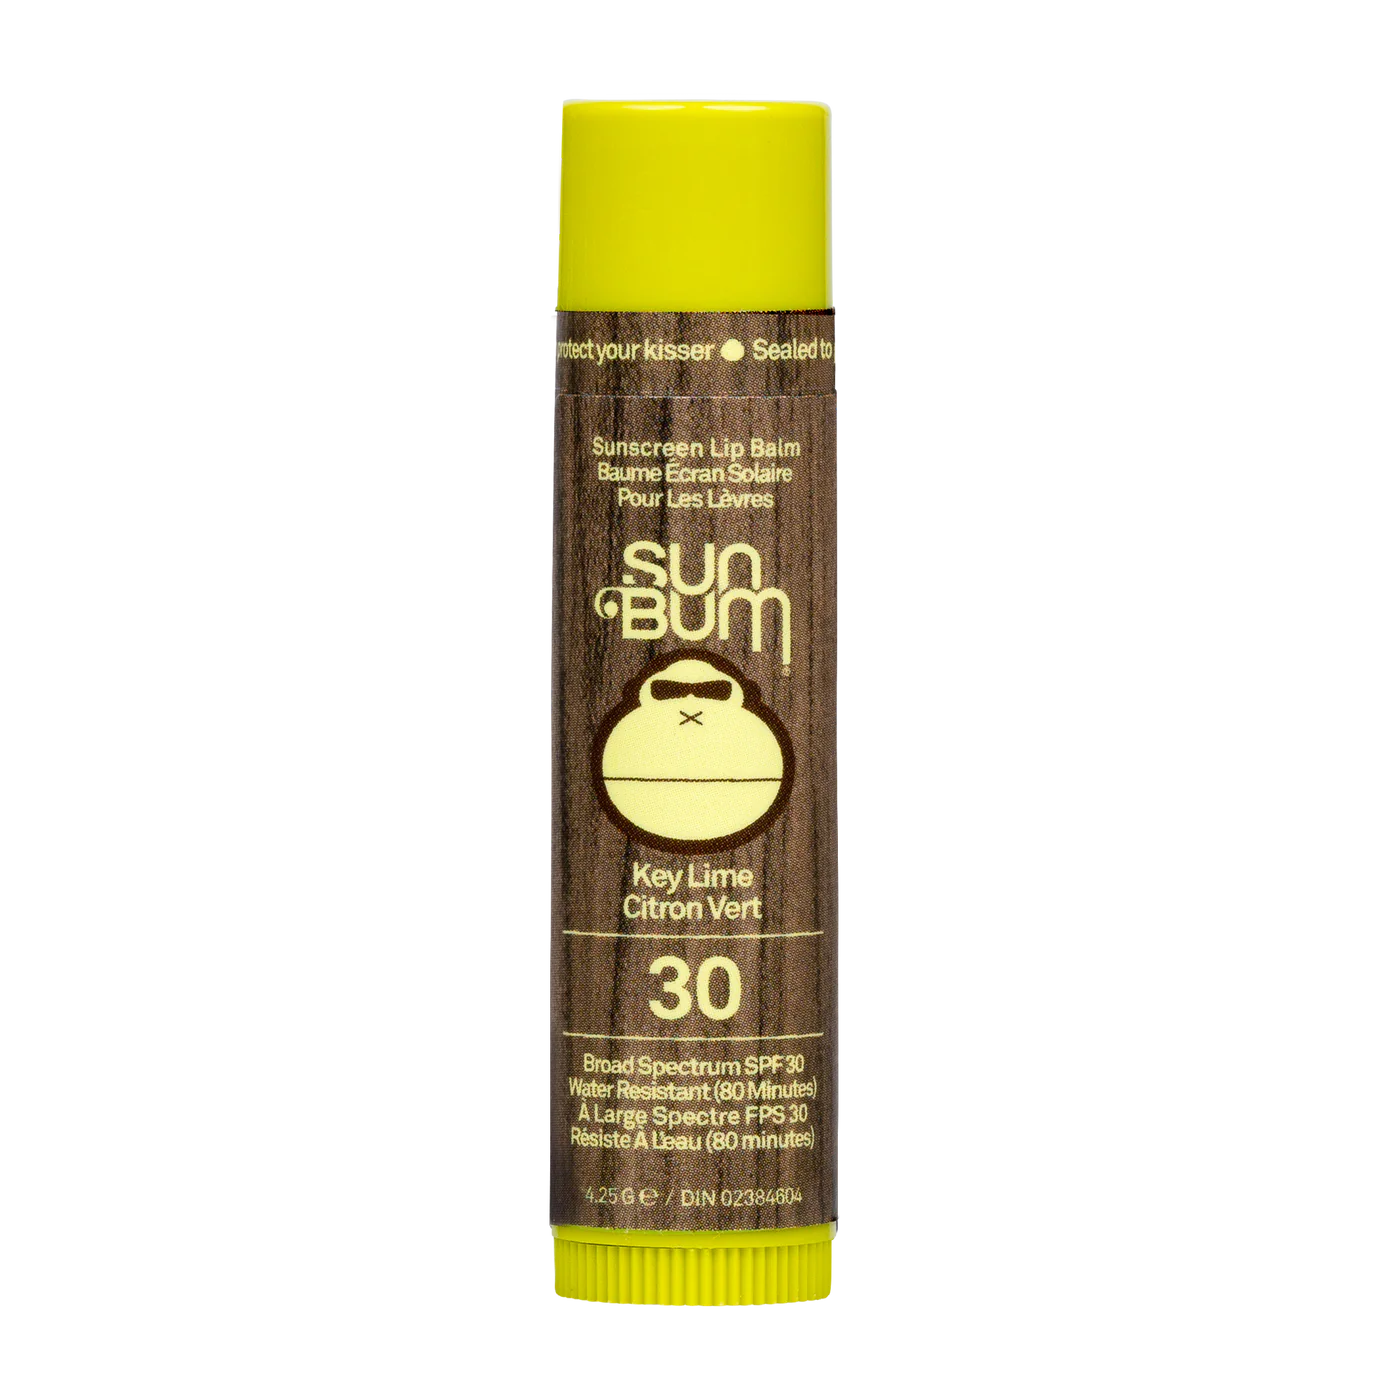 Lip balm container with a bright green top and bottom, wood grain centre, along with the sun bum wordmark and mascot